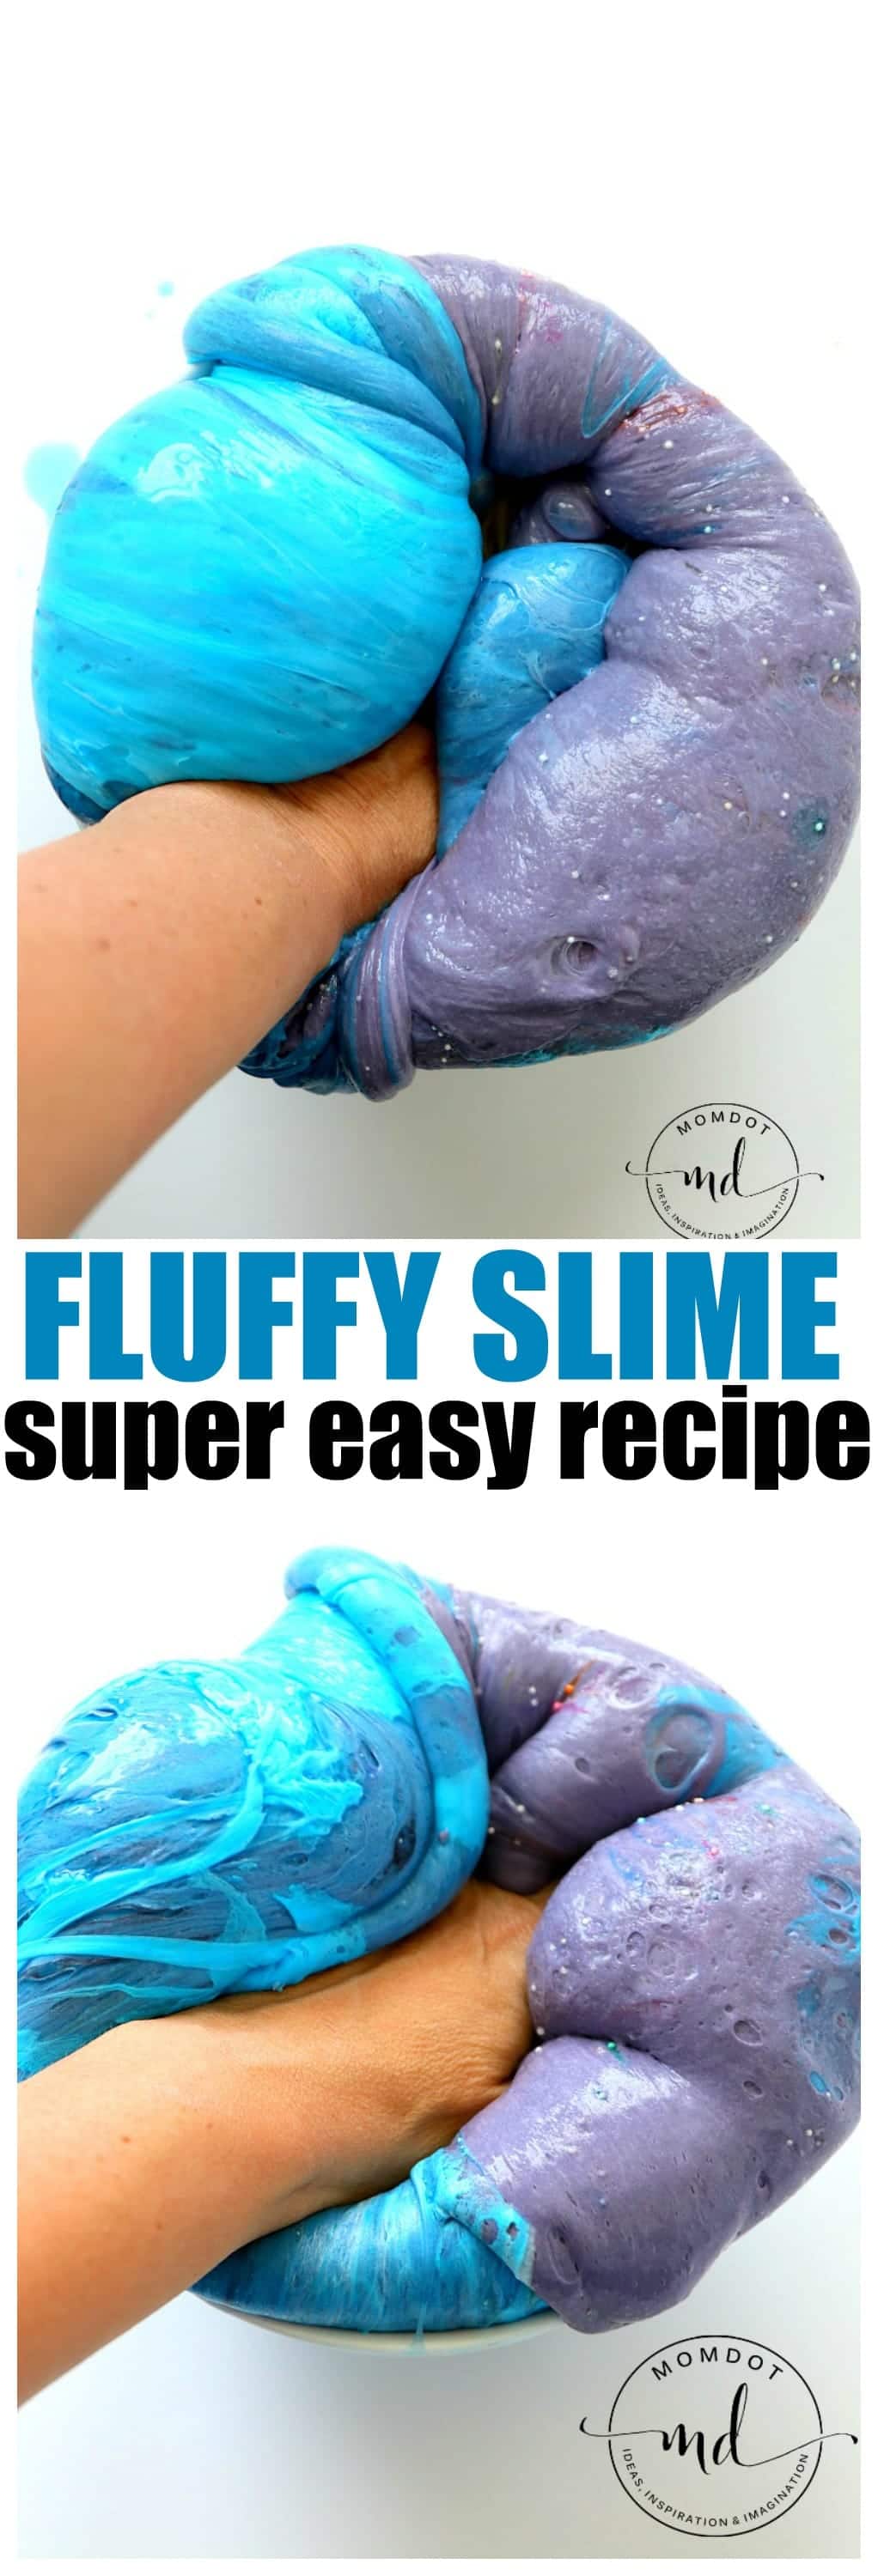 Fluffy Slime in 4 Ingredients - top site for slime ideas